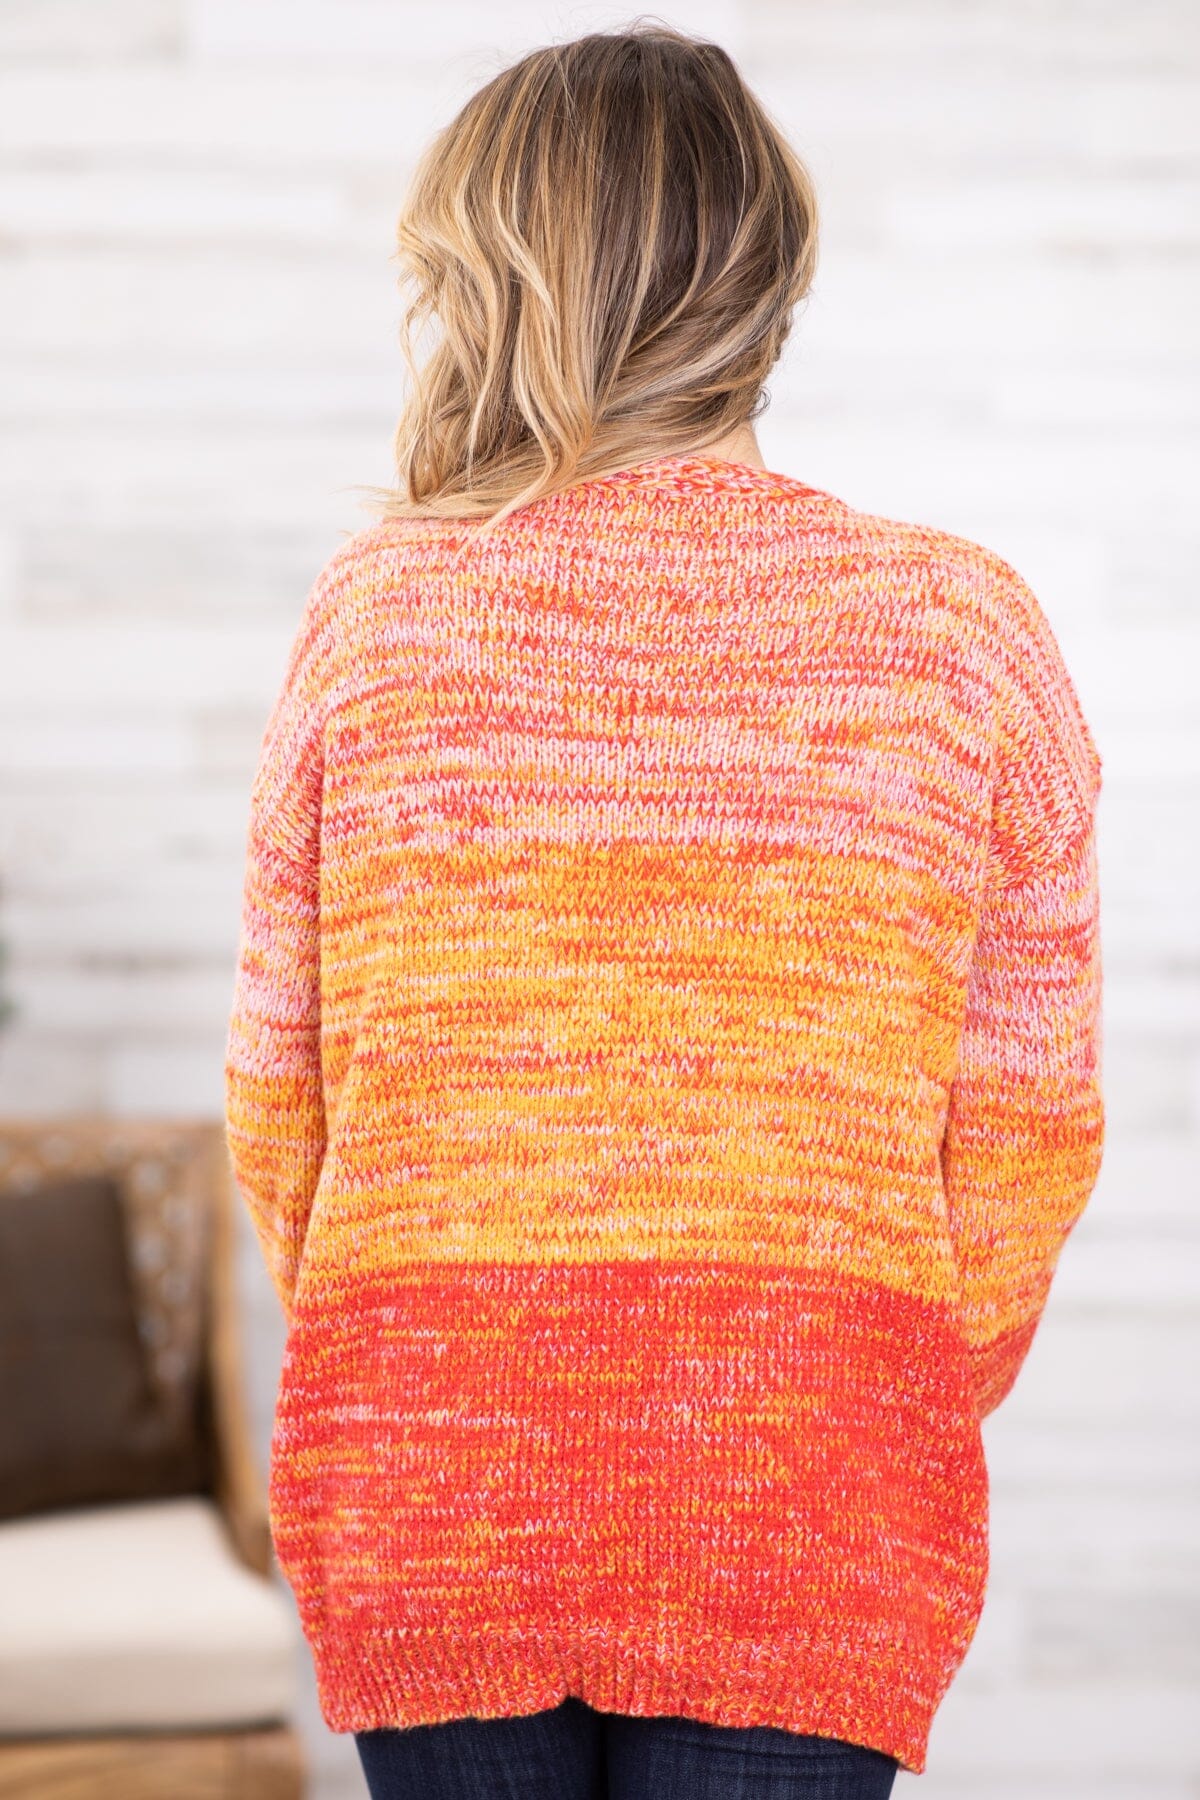 Red Ombre Melange Cardigan - Filly Flair